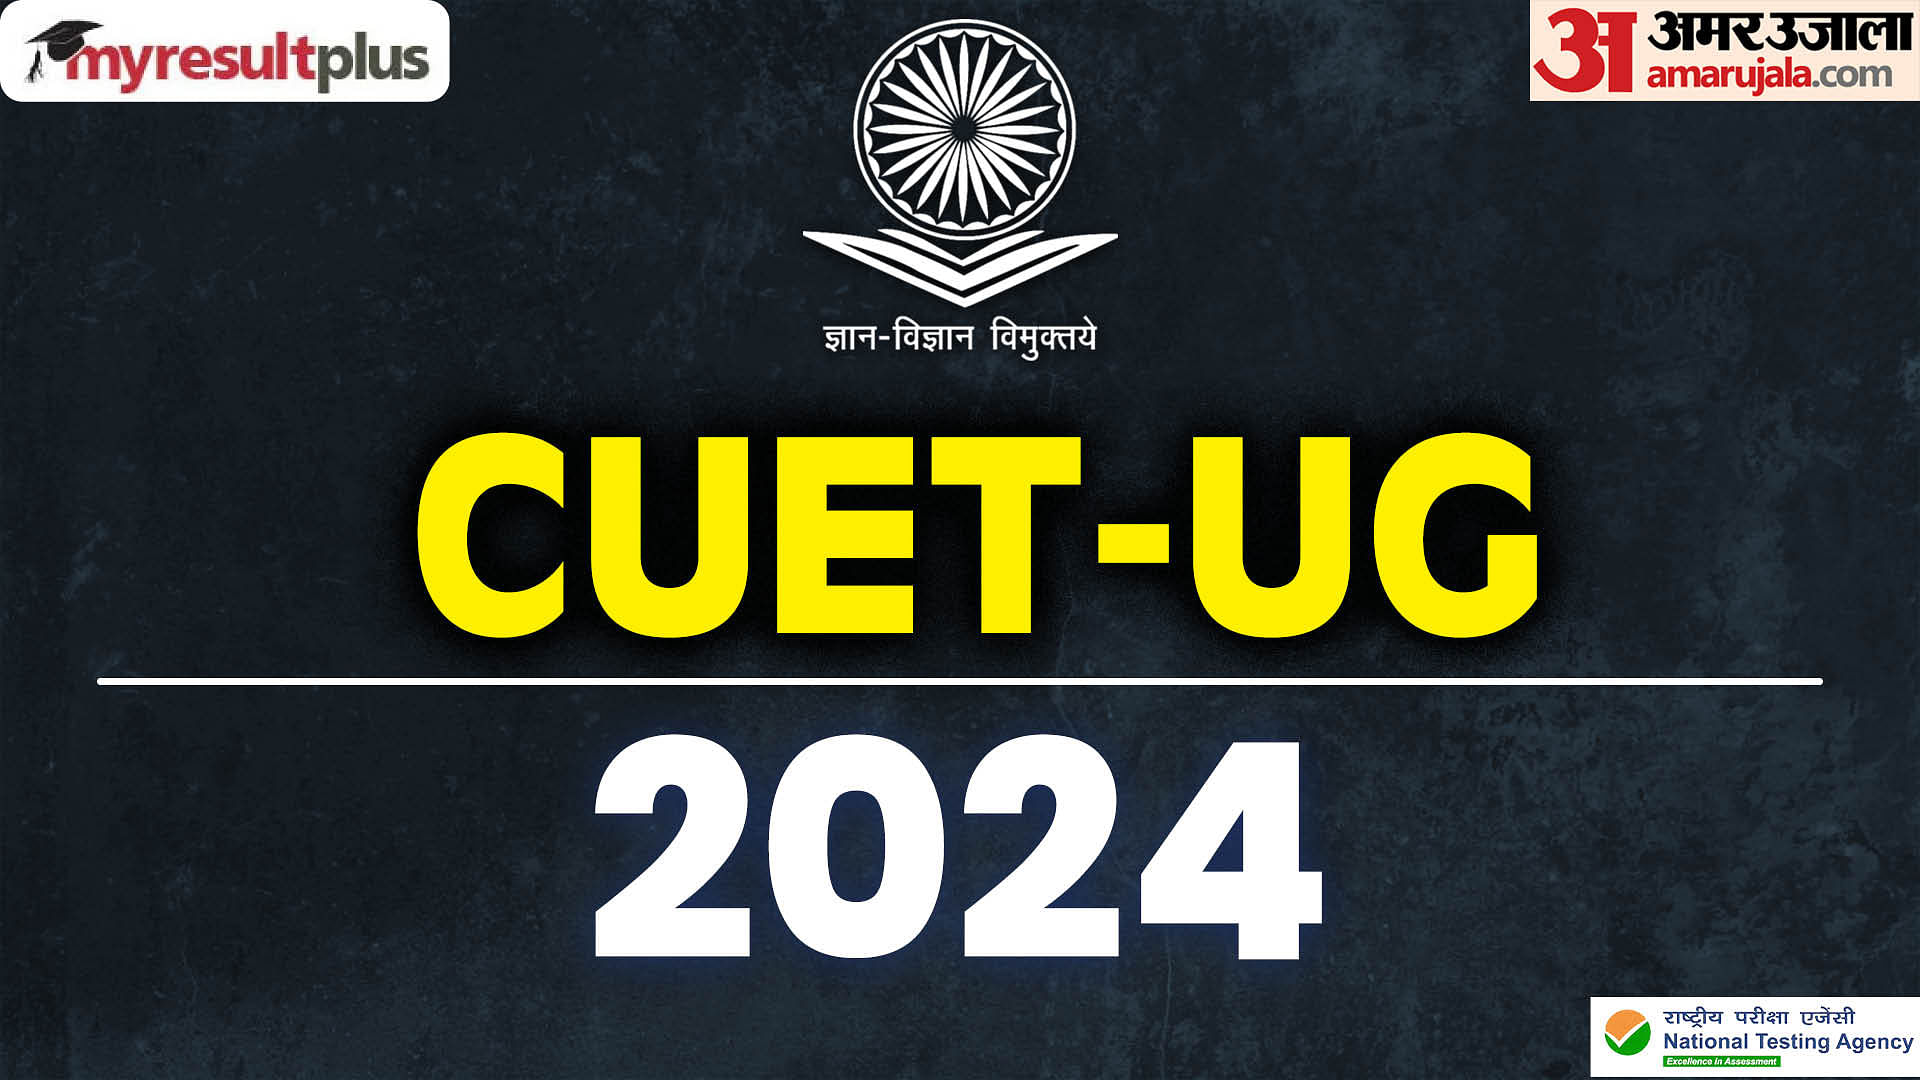 CUET UG 2024 city intimation slip released, Check how to download and other details here